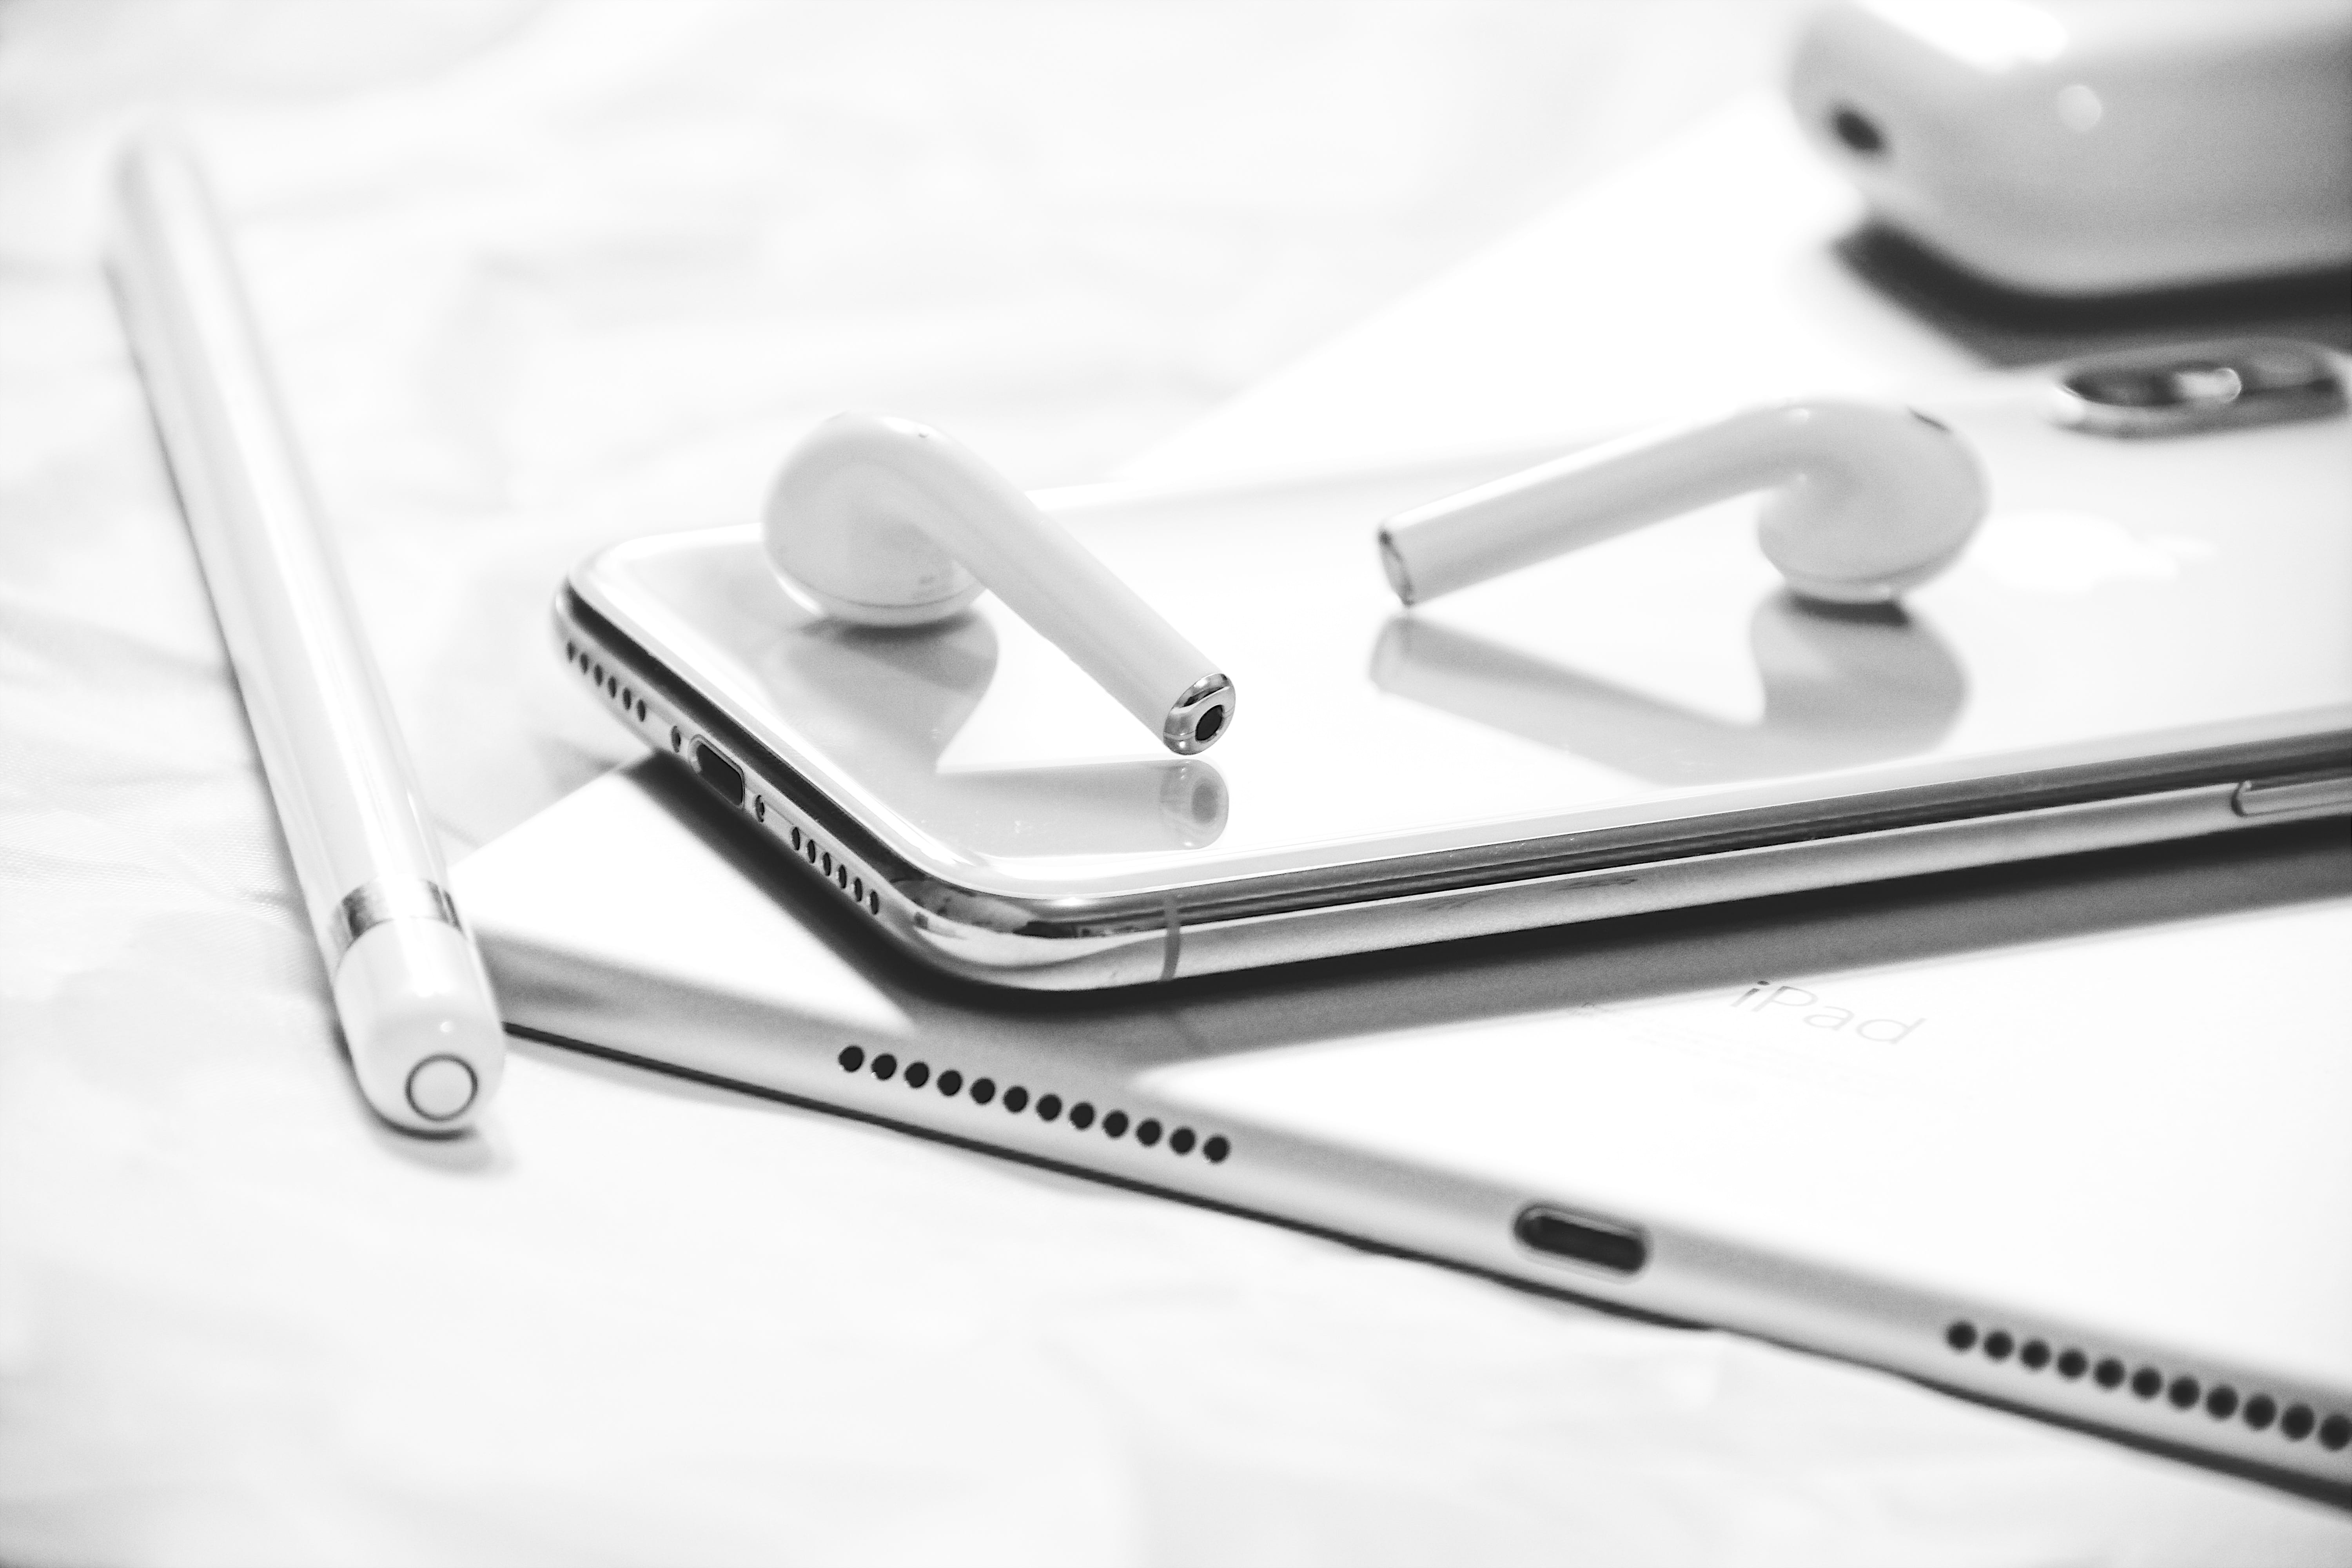 grayscale photography of iPhone X, AirPods, Apple Pencil and iPad, silver iPhone X with Apple Pencil and AirPods